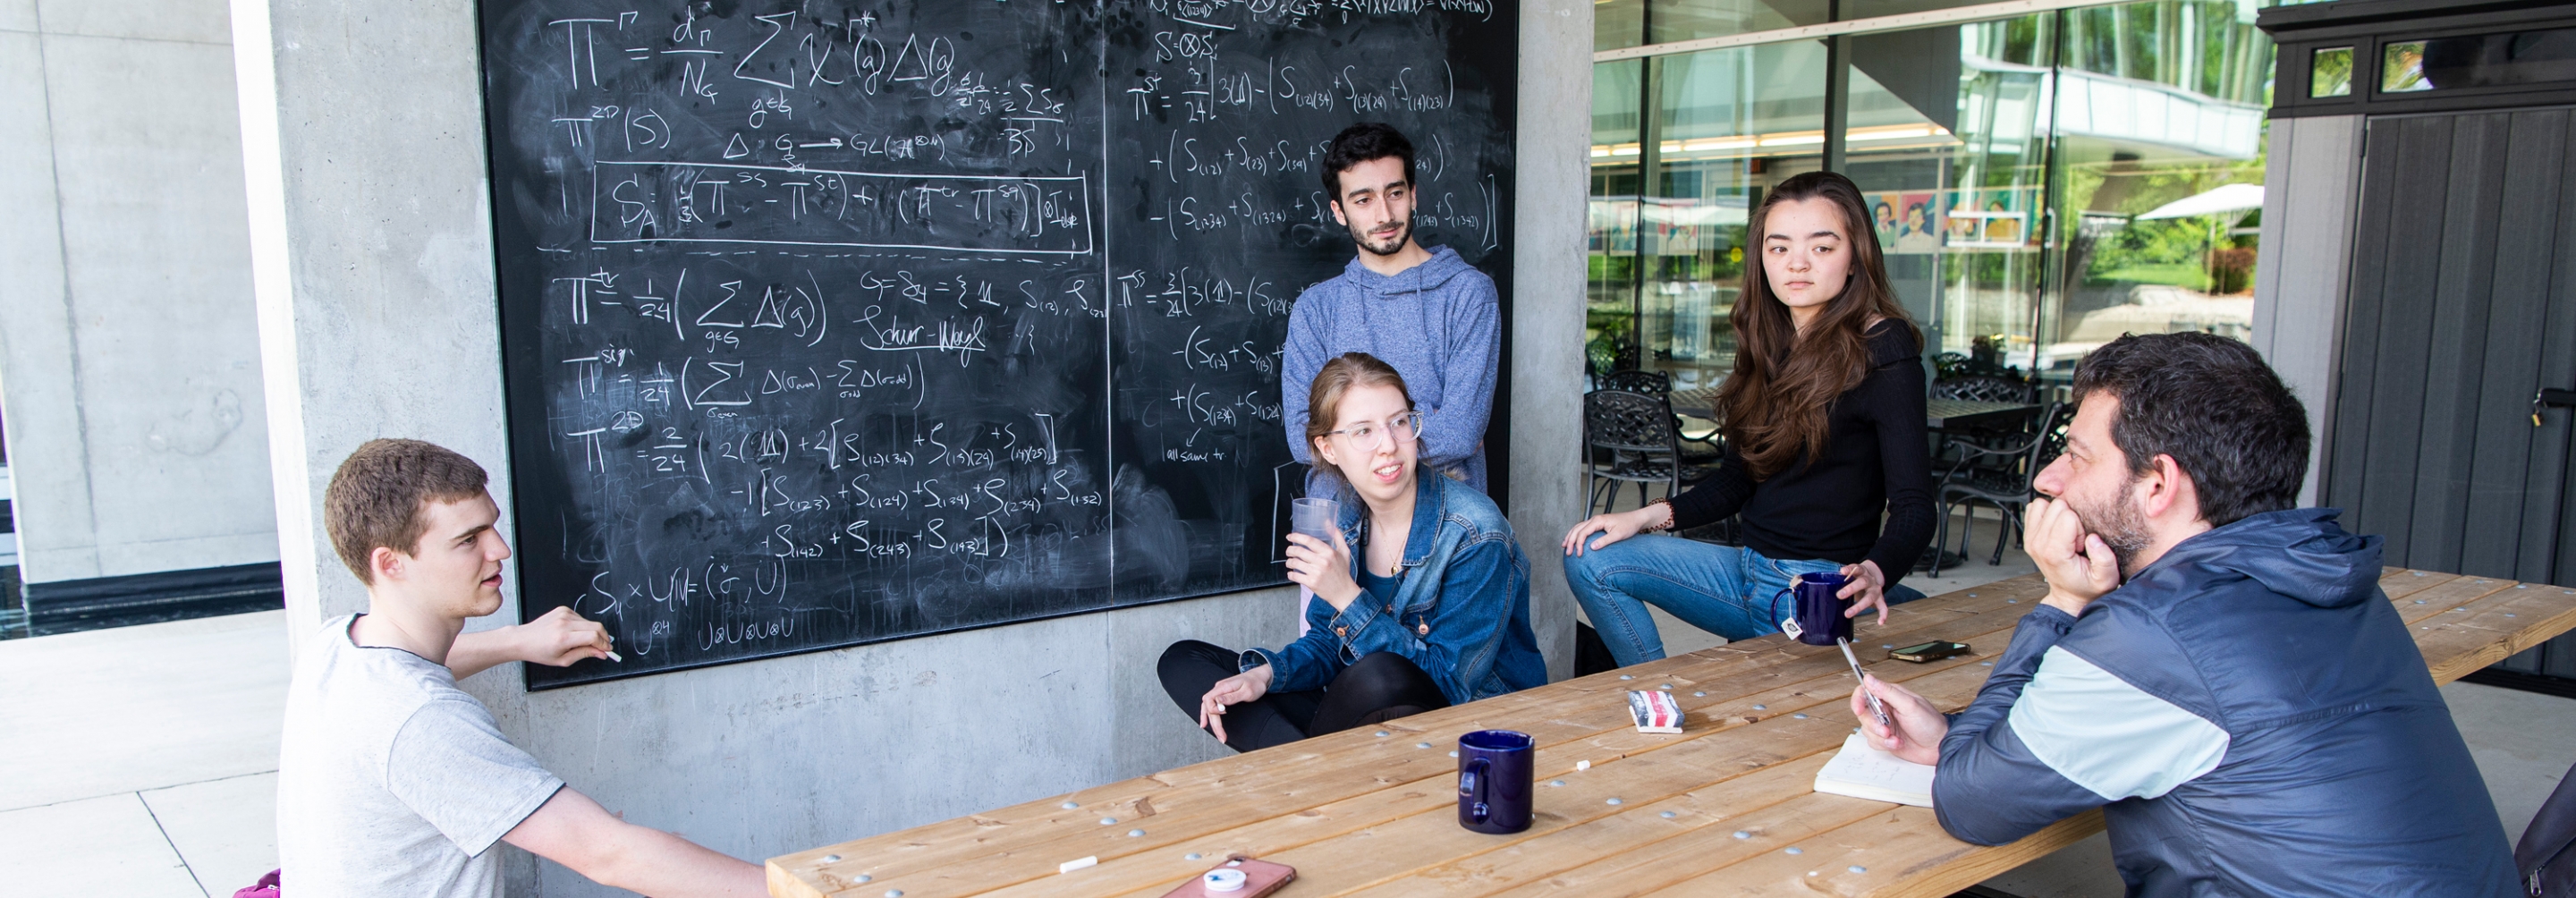 Group of students sitting at a picnic table in front of a blackboard discussing science